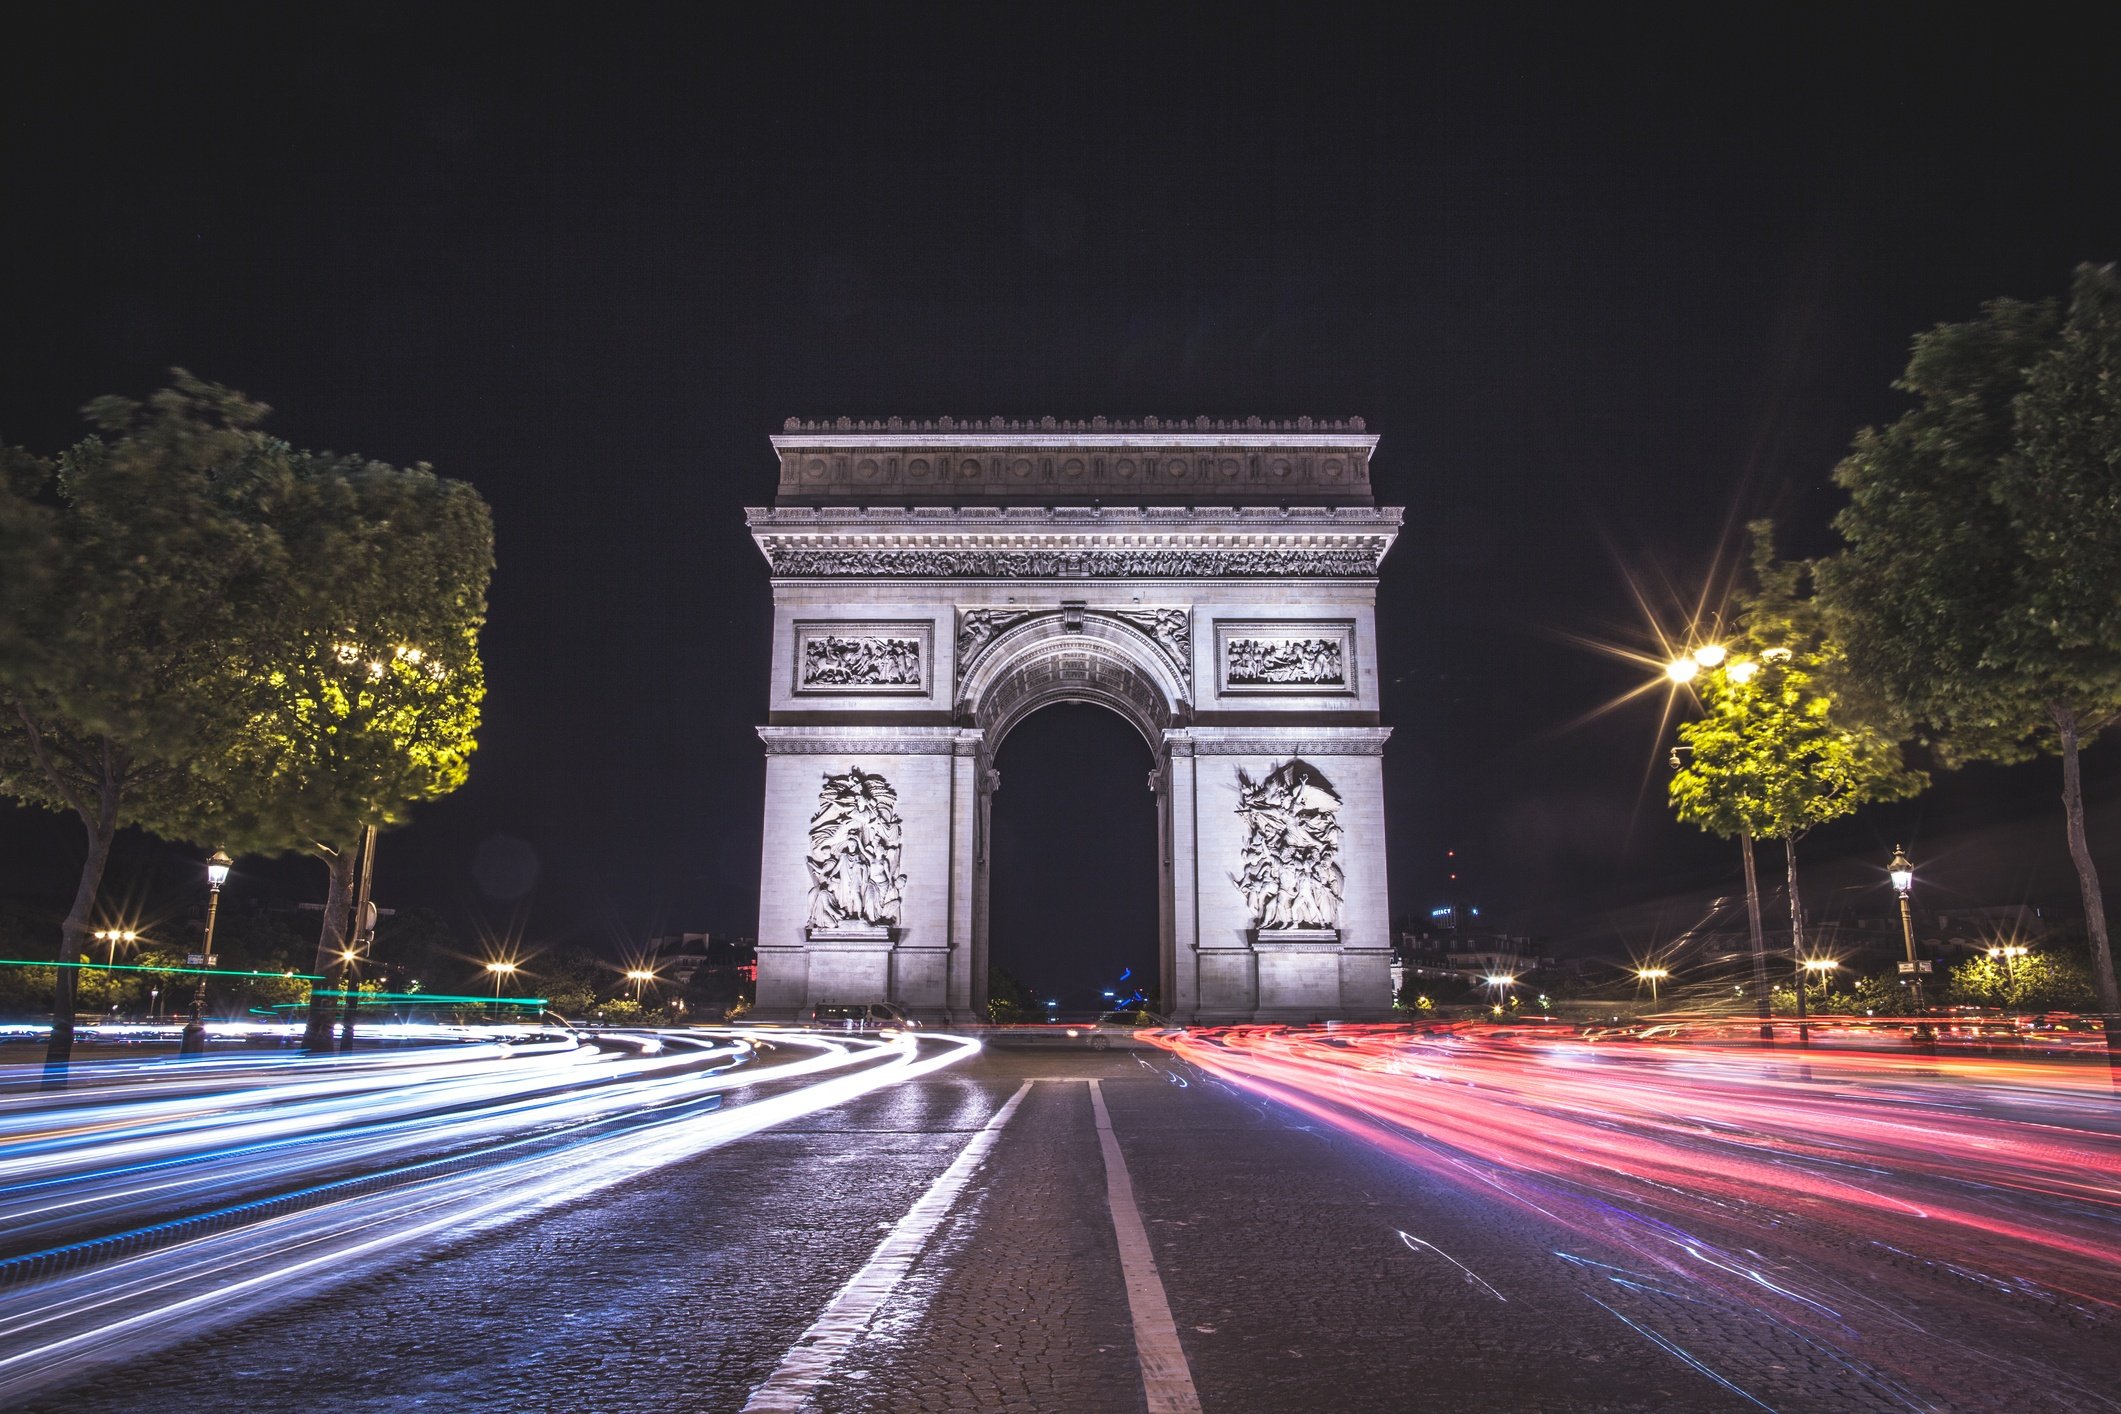 A long exposure photo centered on the famous Arc de Triomphe with traffic passing. 2017 Paris, France